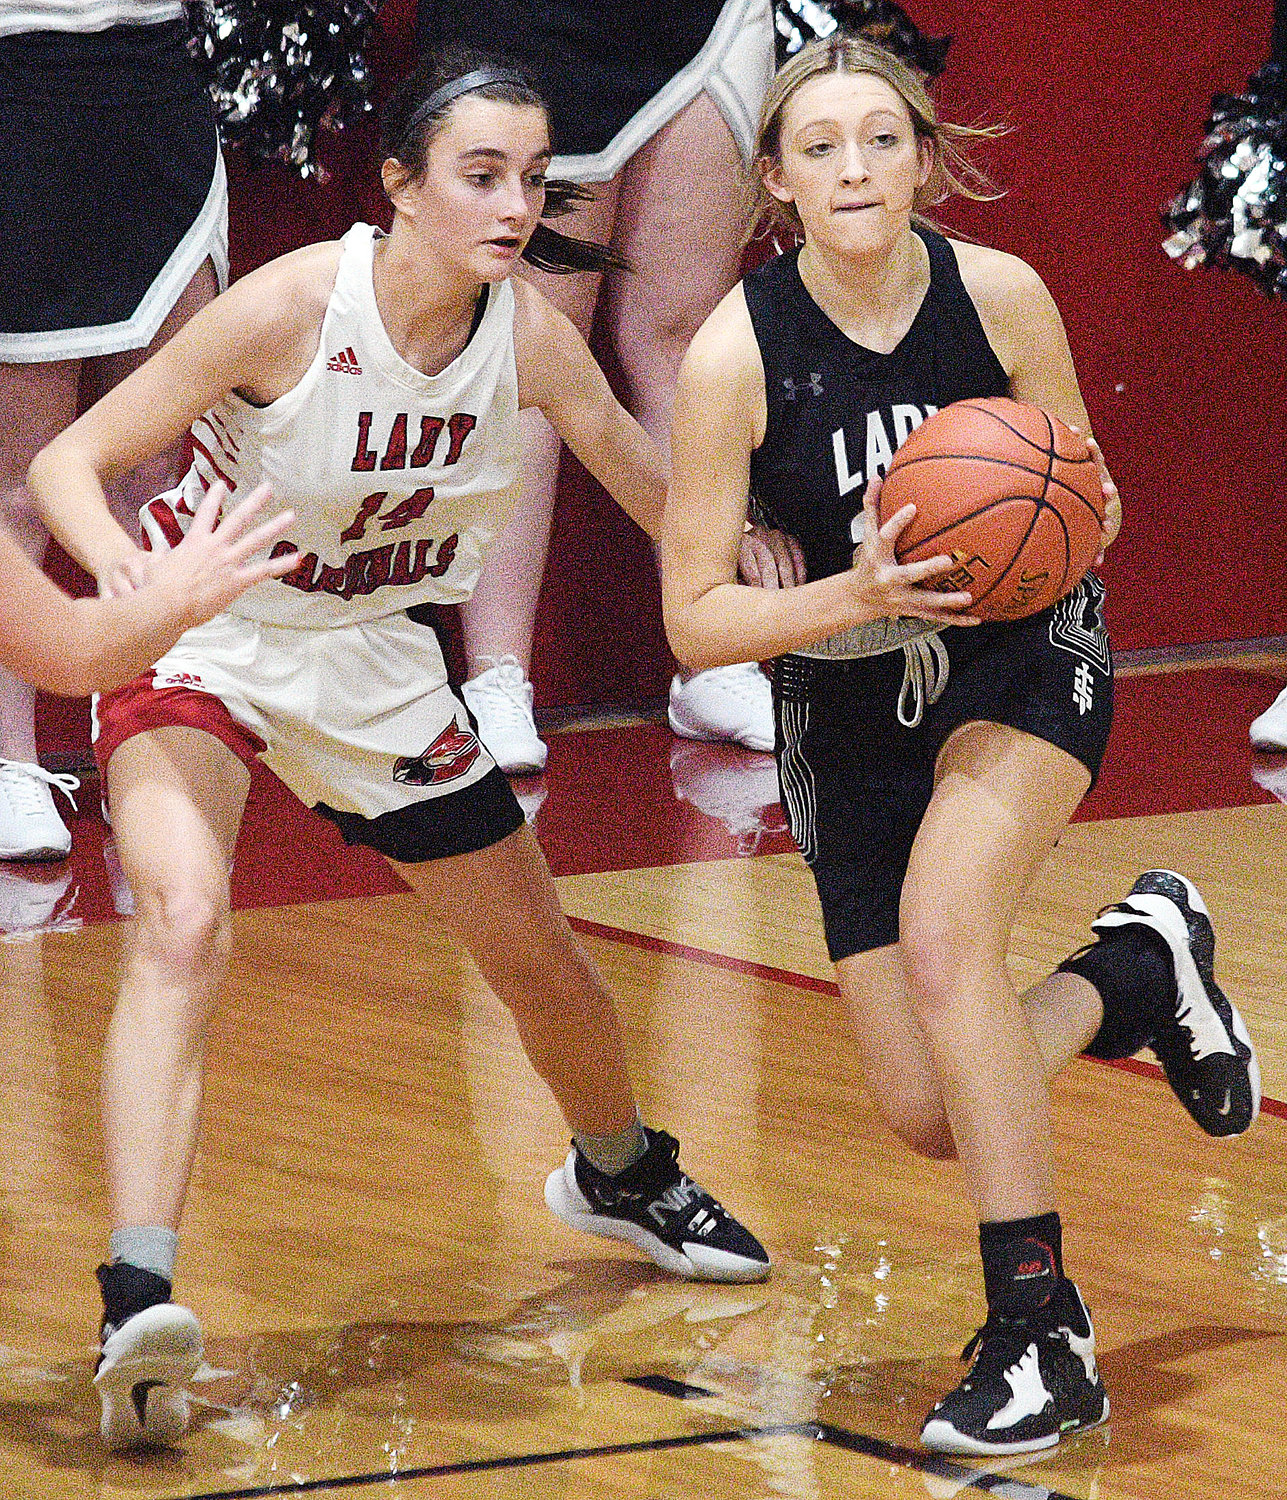 SPARTA’S MYA FULTON looks to make a pass in front of Chadwick’s Lexi Loveland.